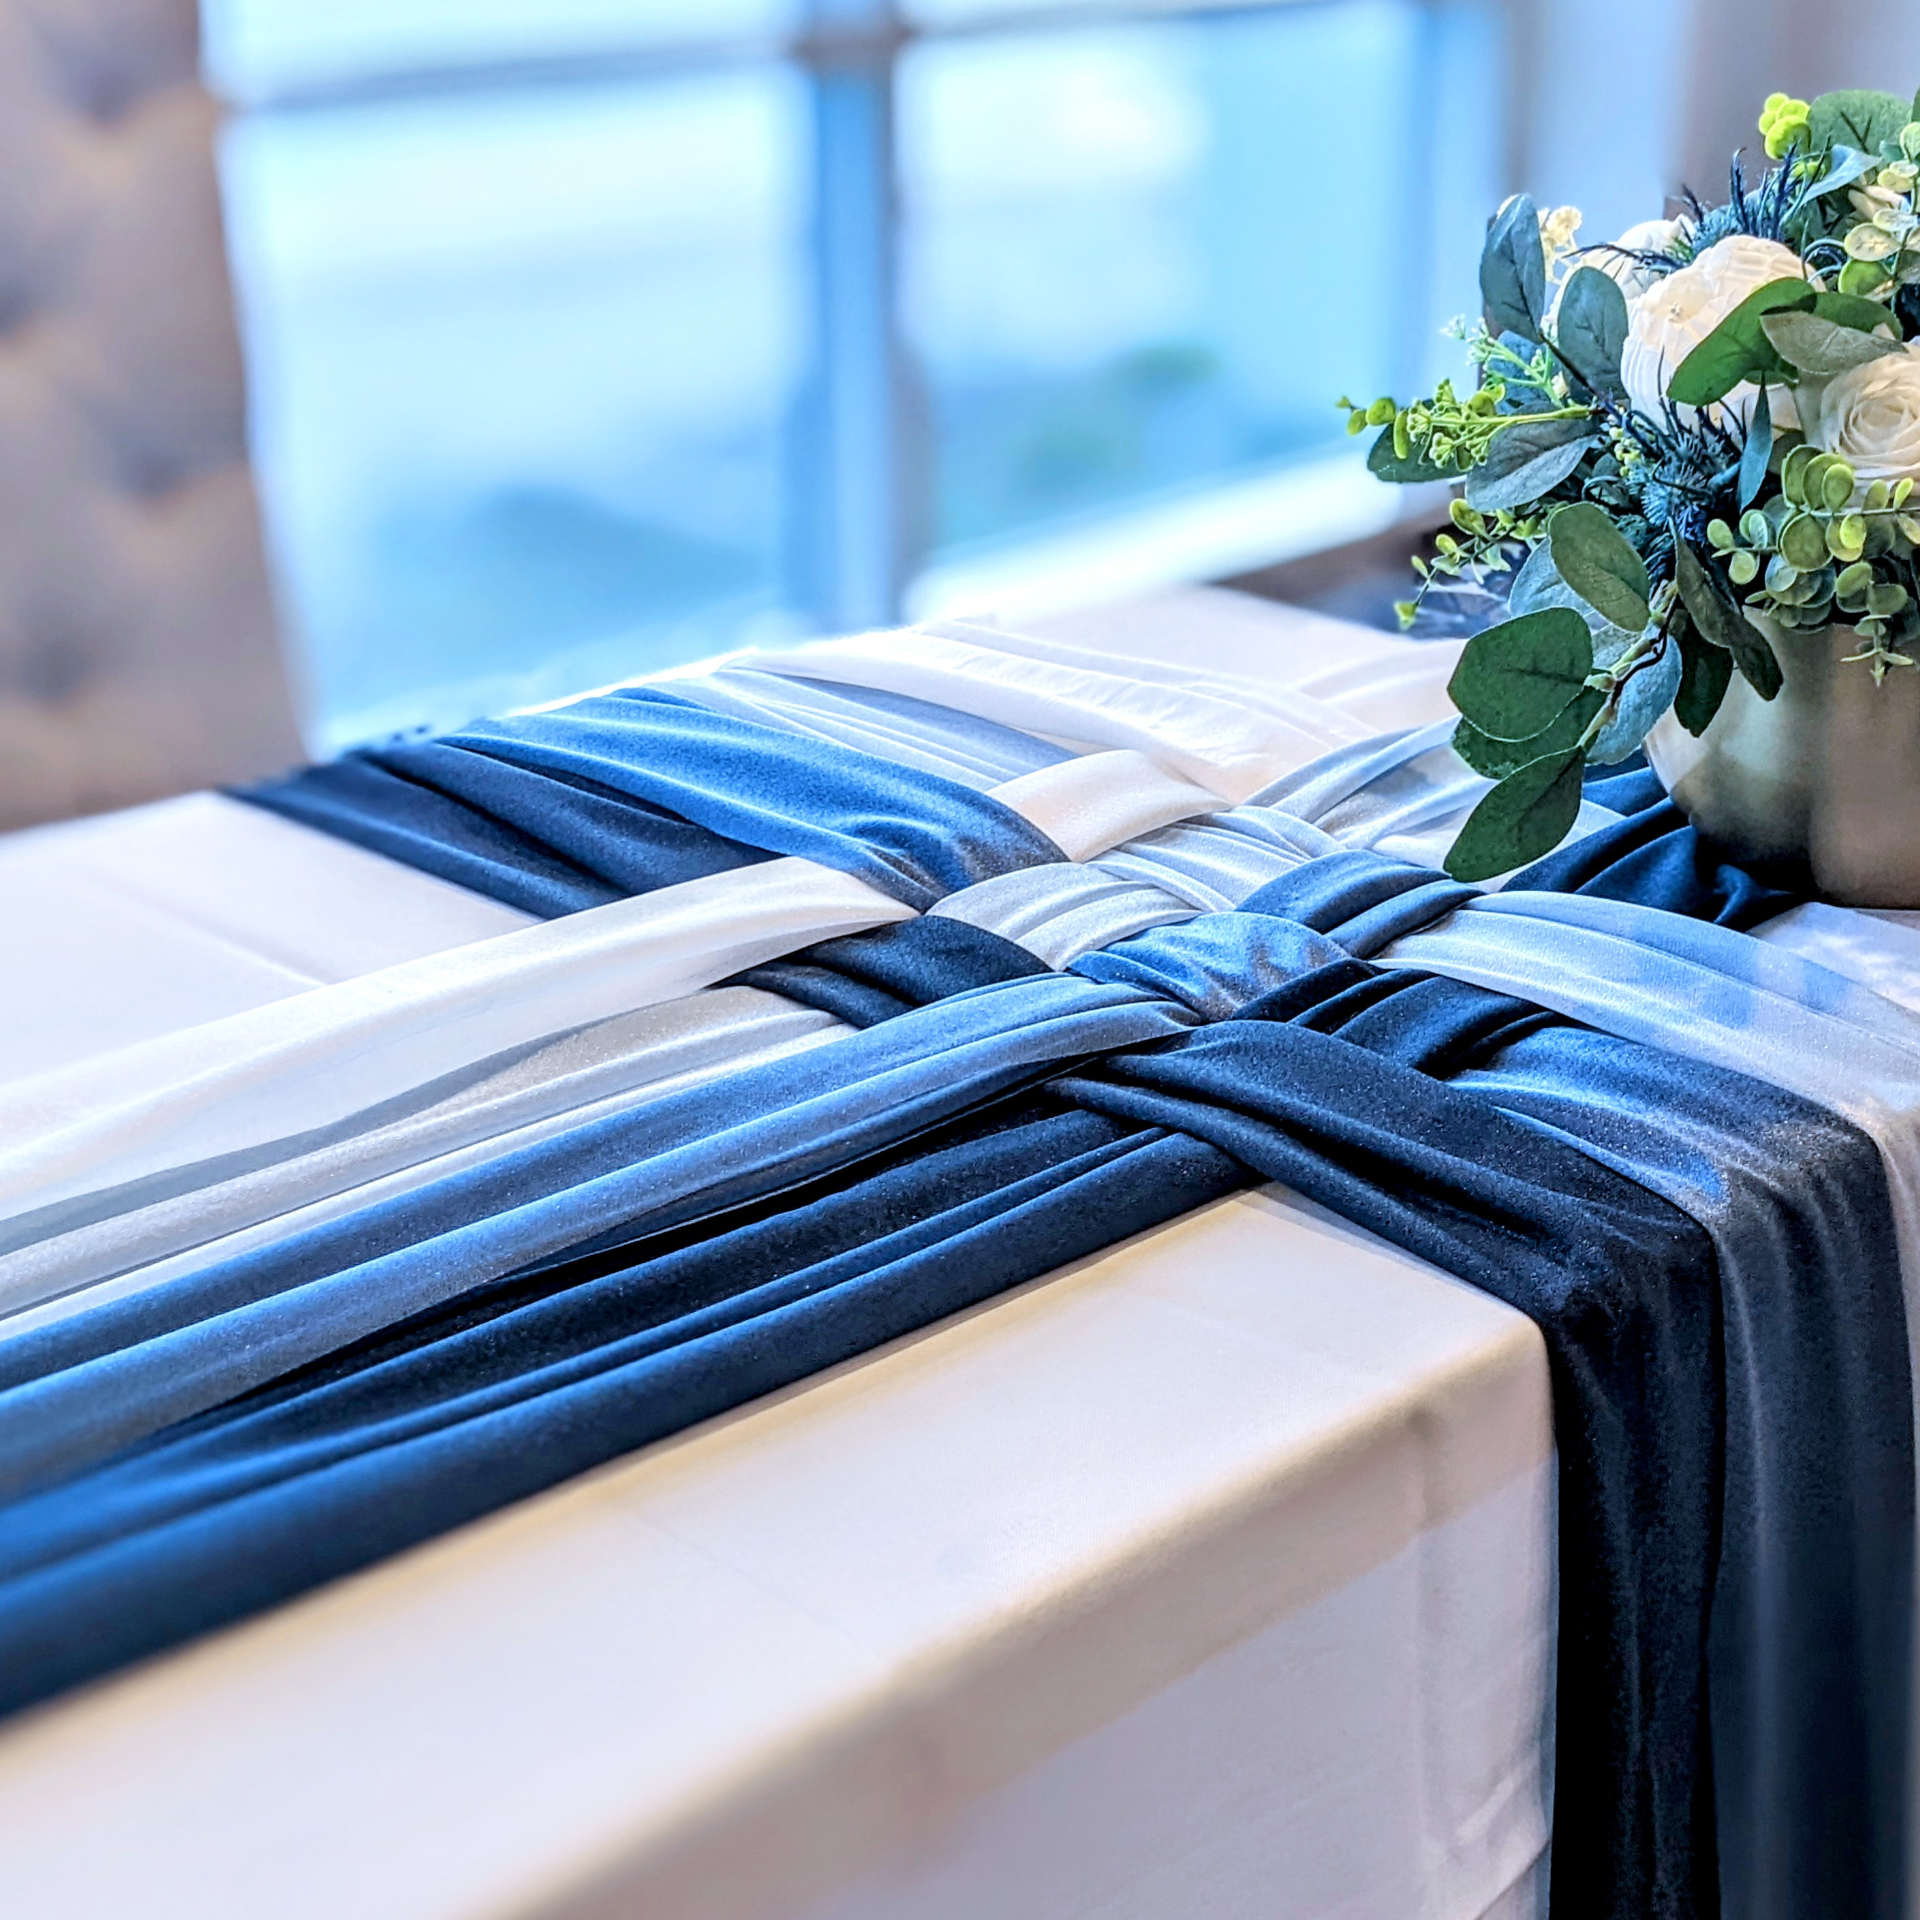 Chiffon Table Runner blue and white weave Wedding Party Event Rental Panama City Beach